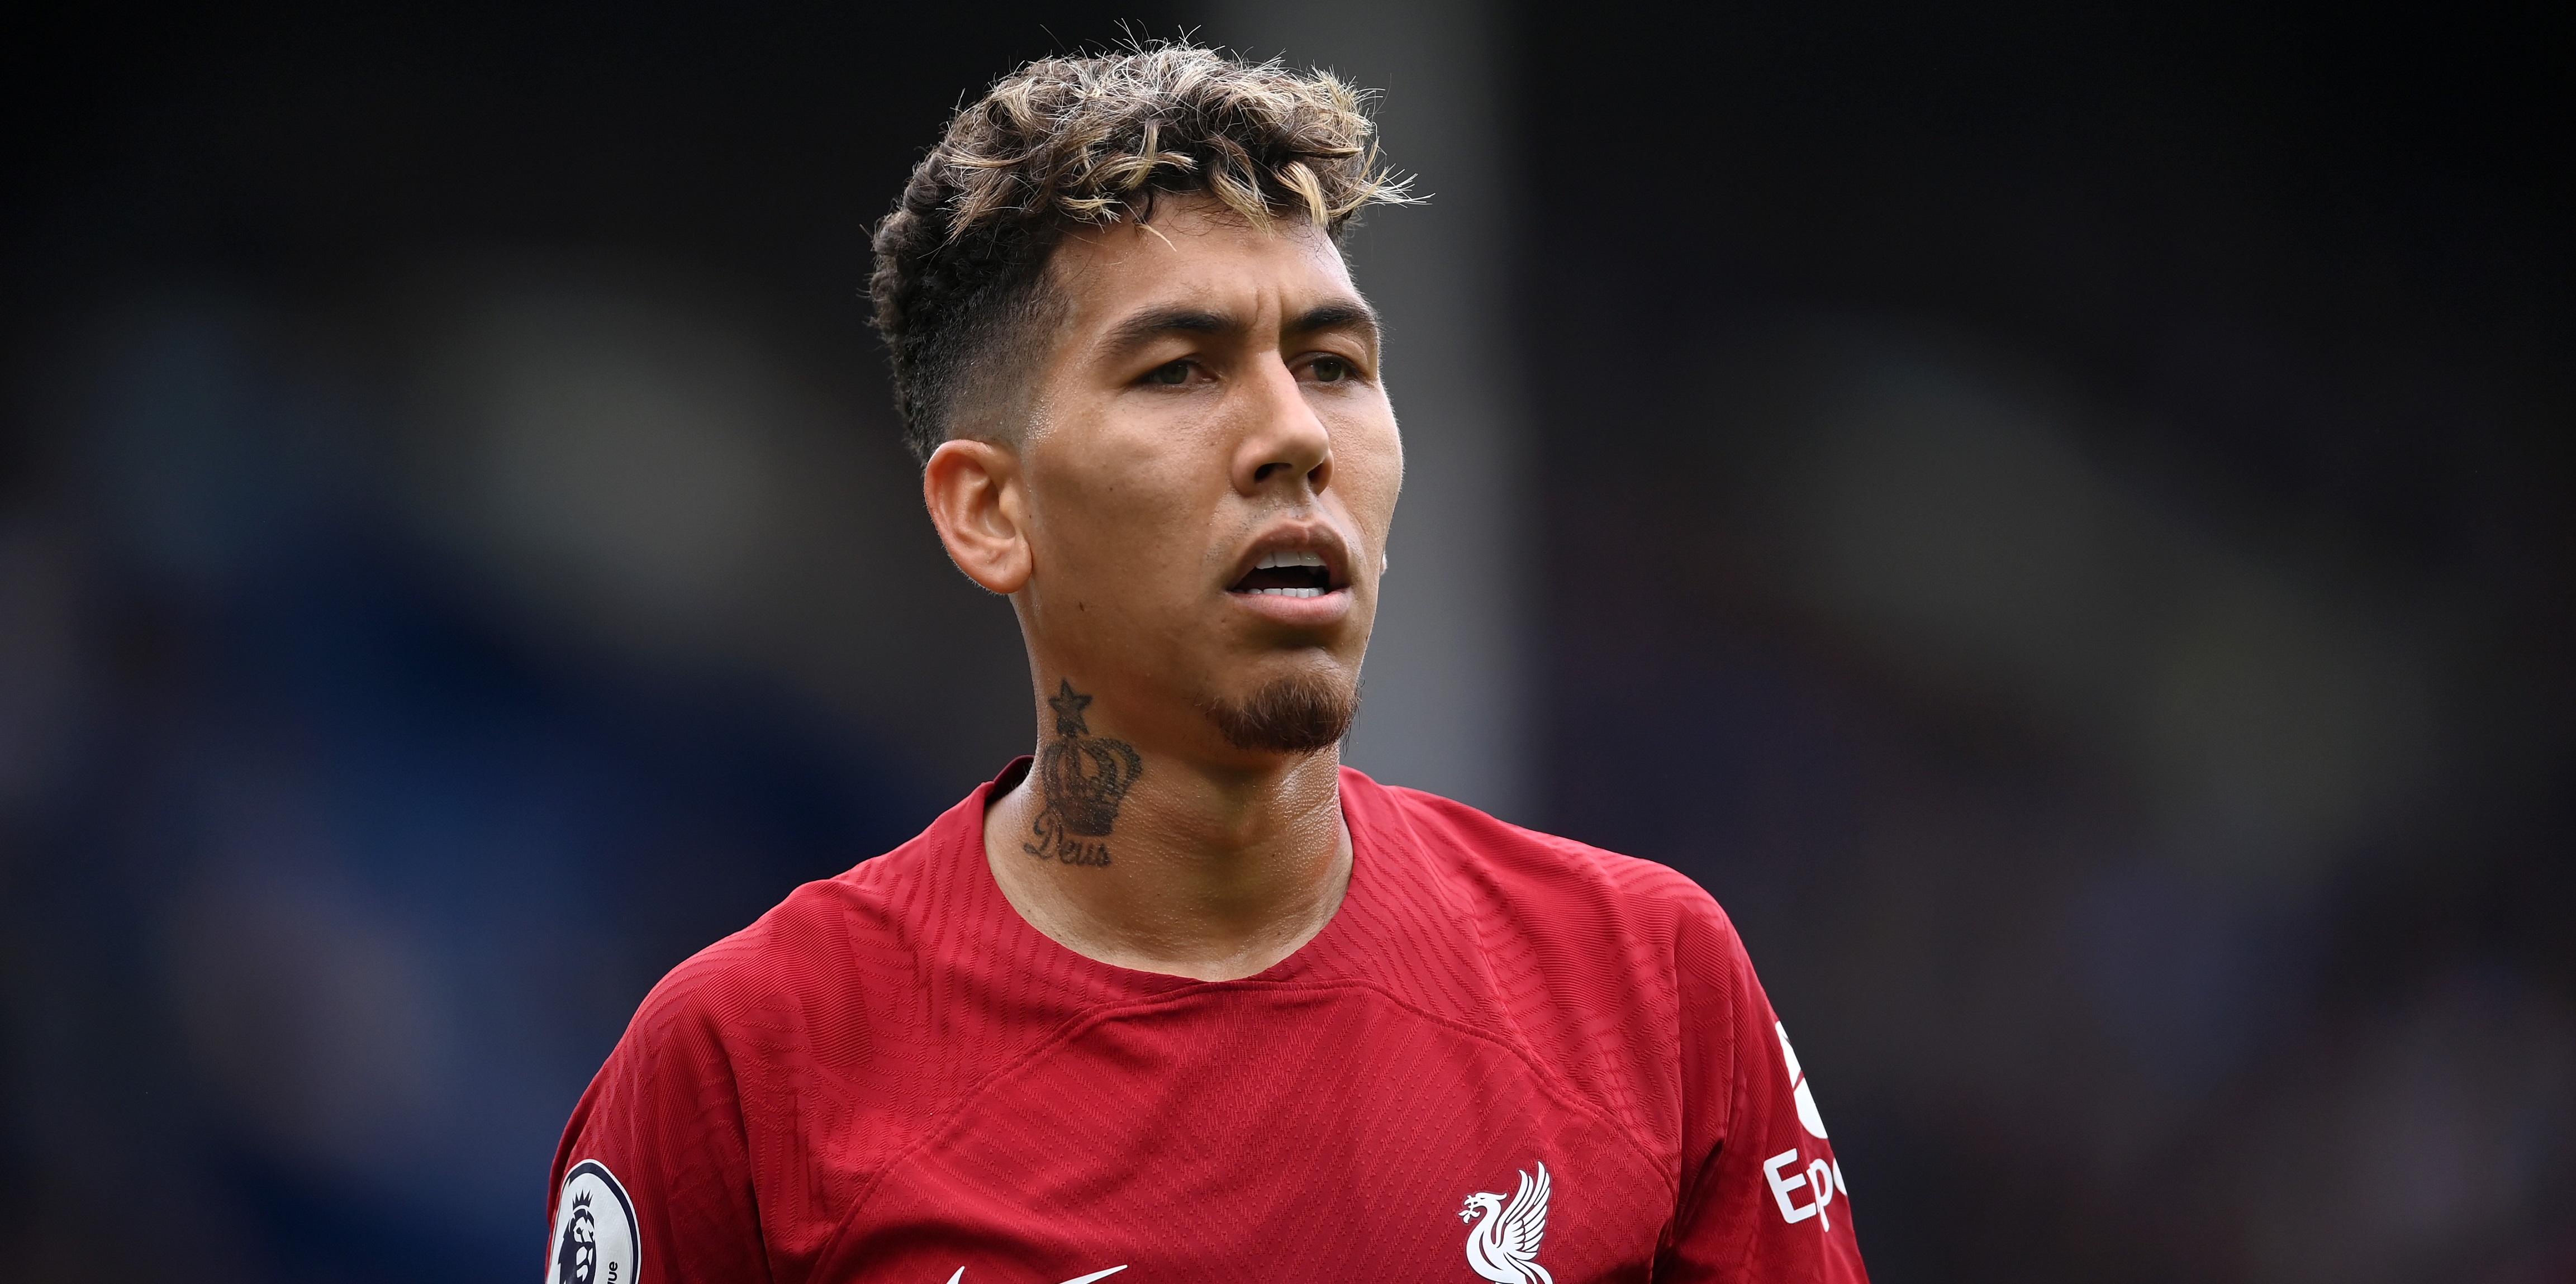 Liverpool and Barcelona ‘considering’ swap deal that could see Bobby Firmino head to Camp Nou – report